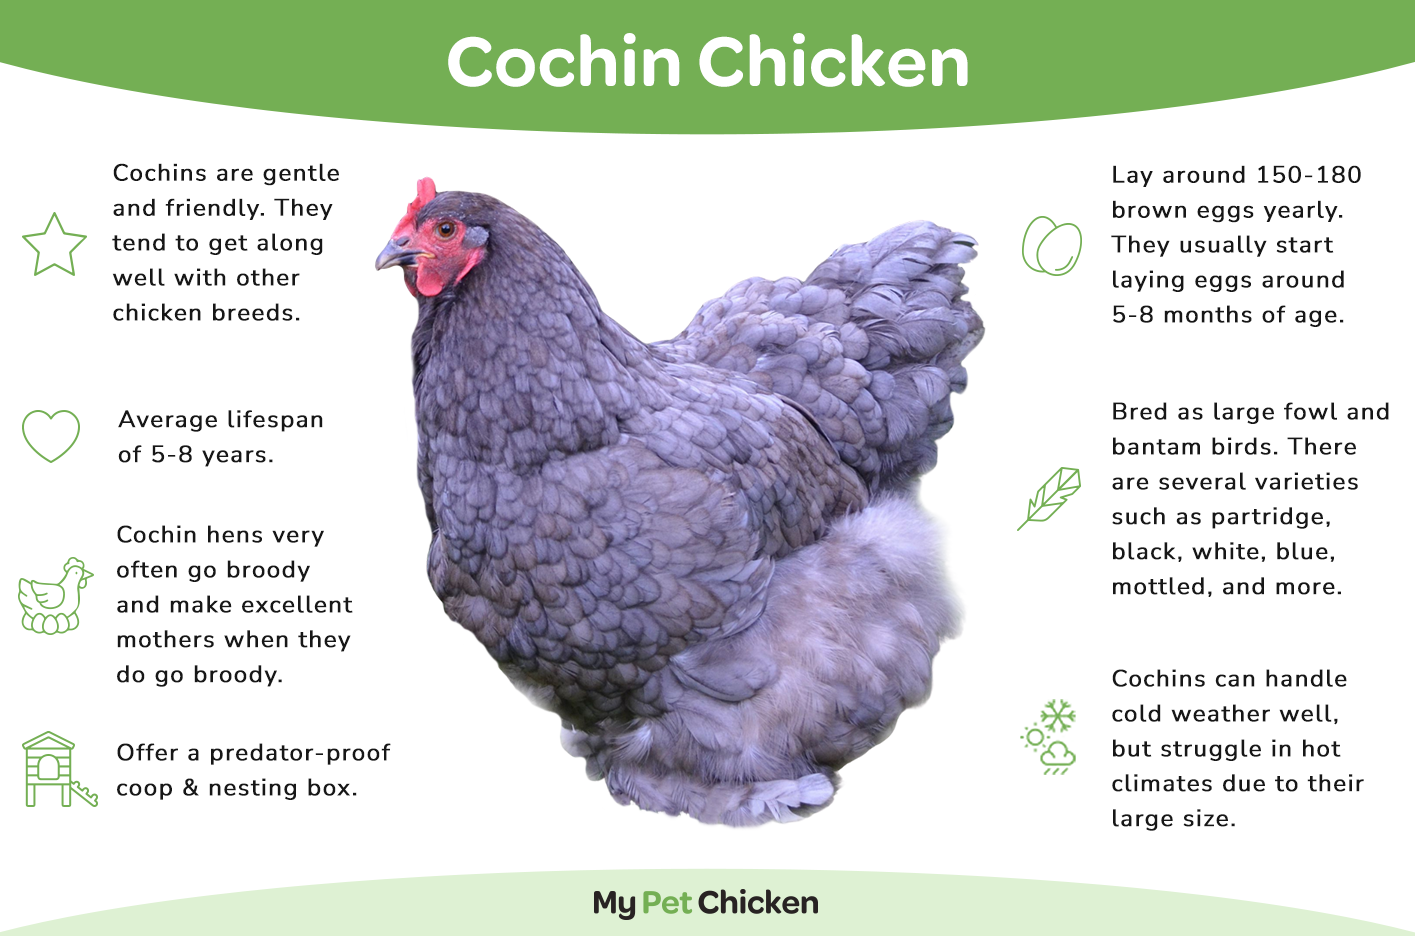 Cochin chickens are available in large fowl and bantam sizes. 